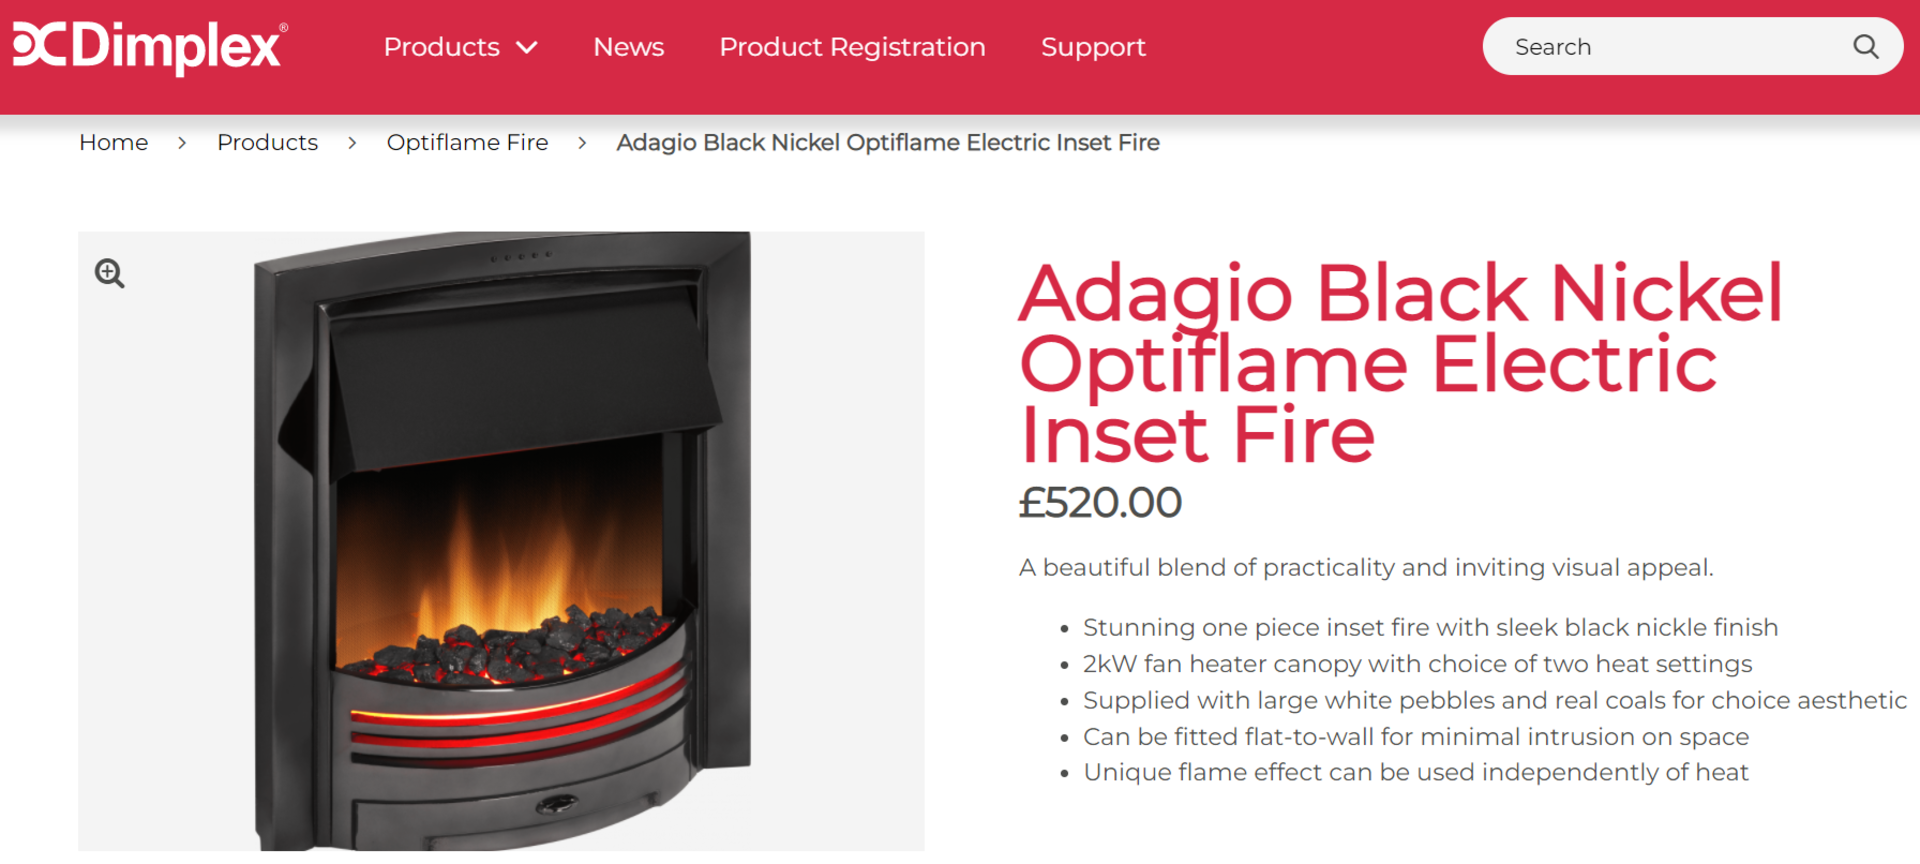 1 x BRAND NEW BOXED Dimplex Adagio Black Nickel Optiflame Electric Inset Fire. RRP £520.00. A